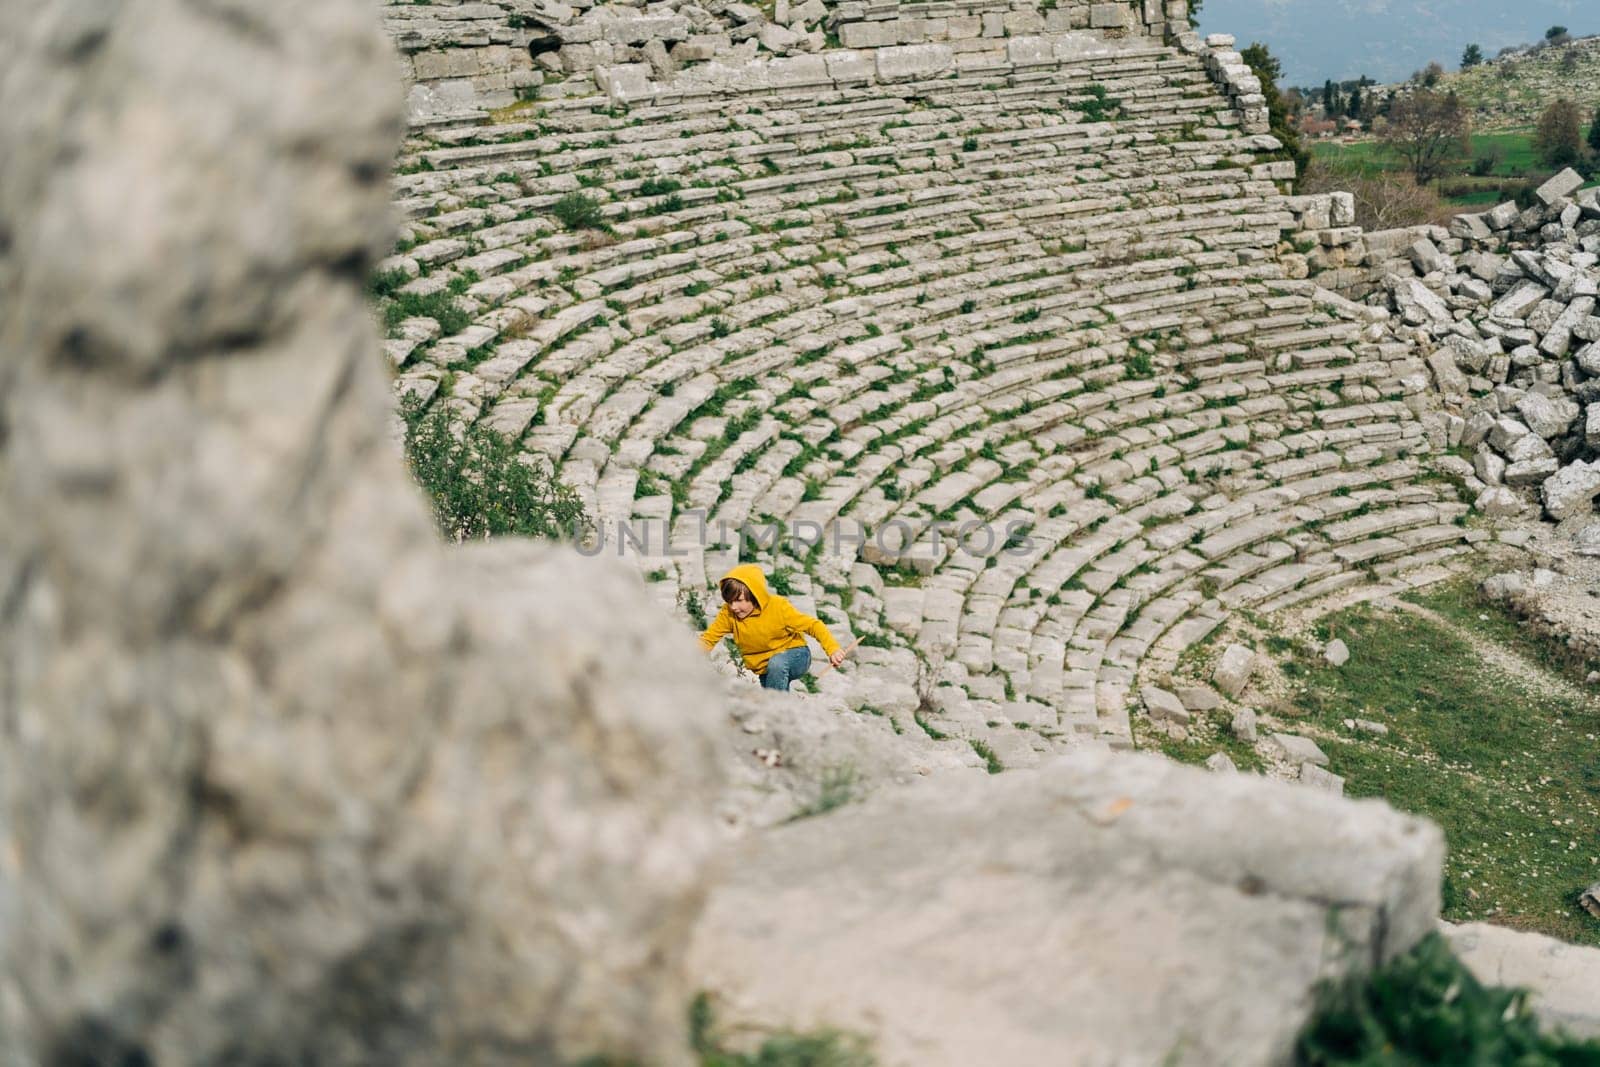 School boy kid in yellow hoodie and blue jeans exploring remains of ancient arena stone coliseum amphitheater by Ostanina